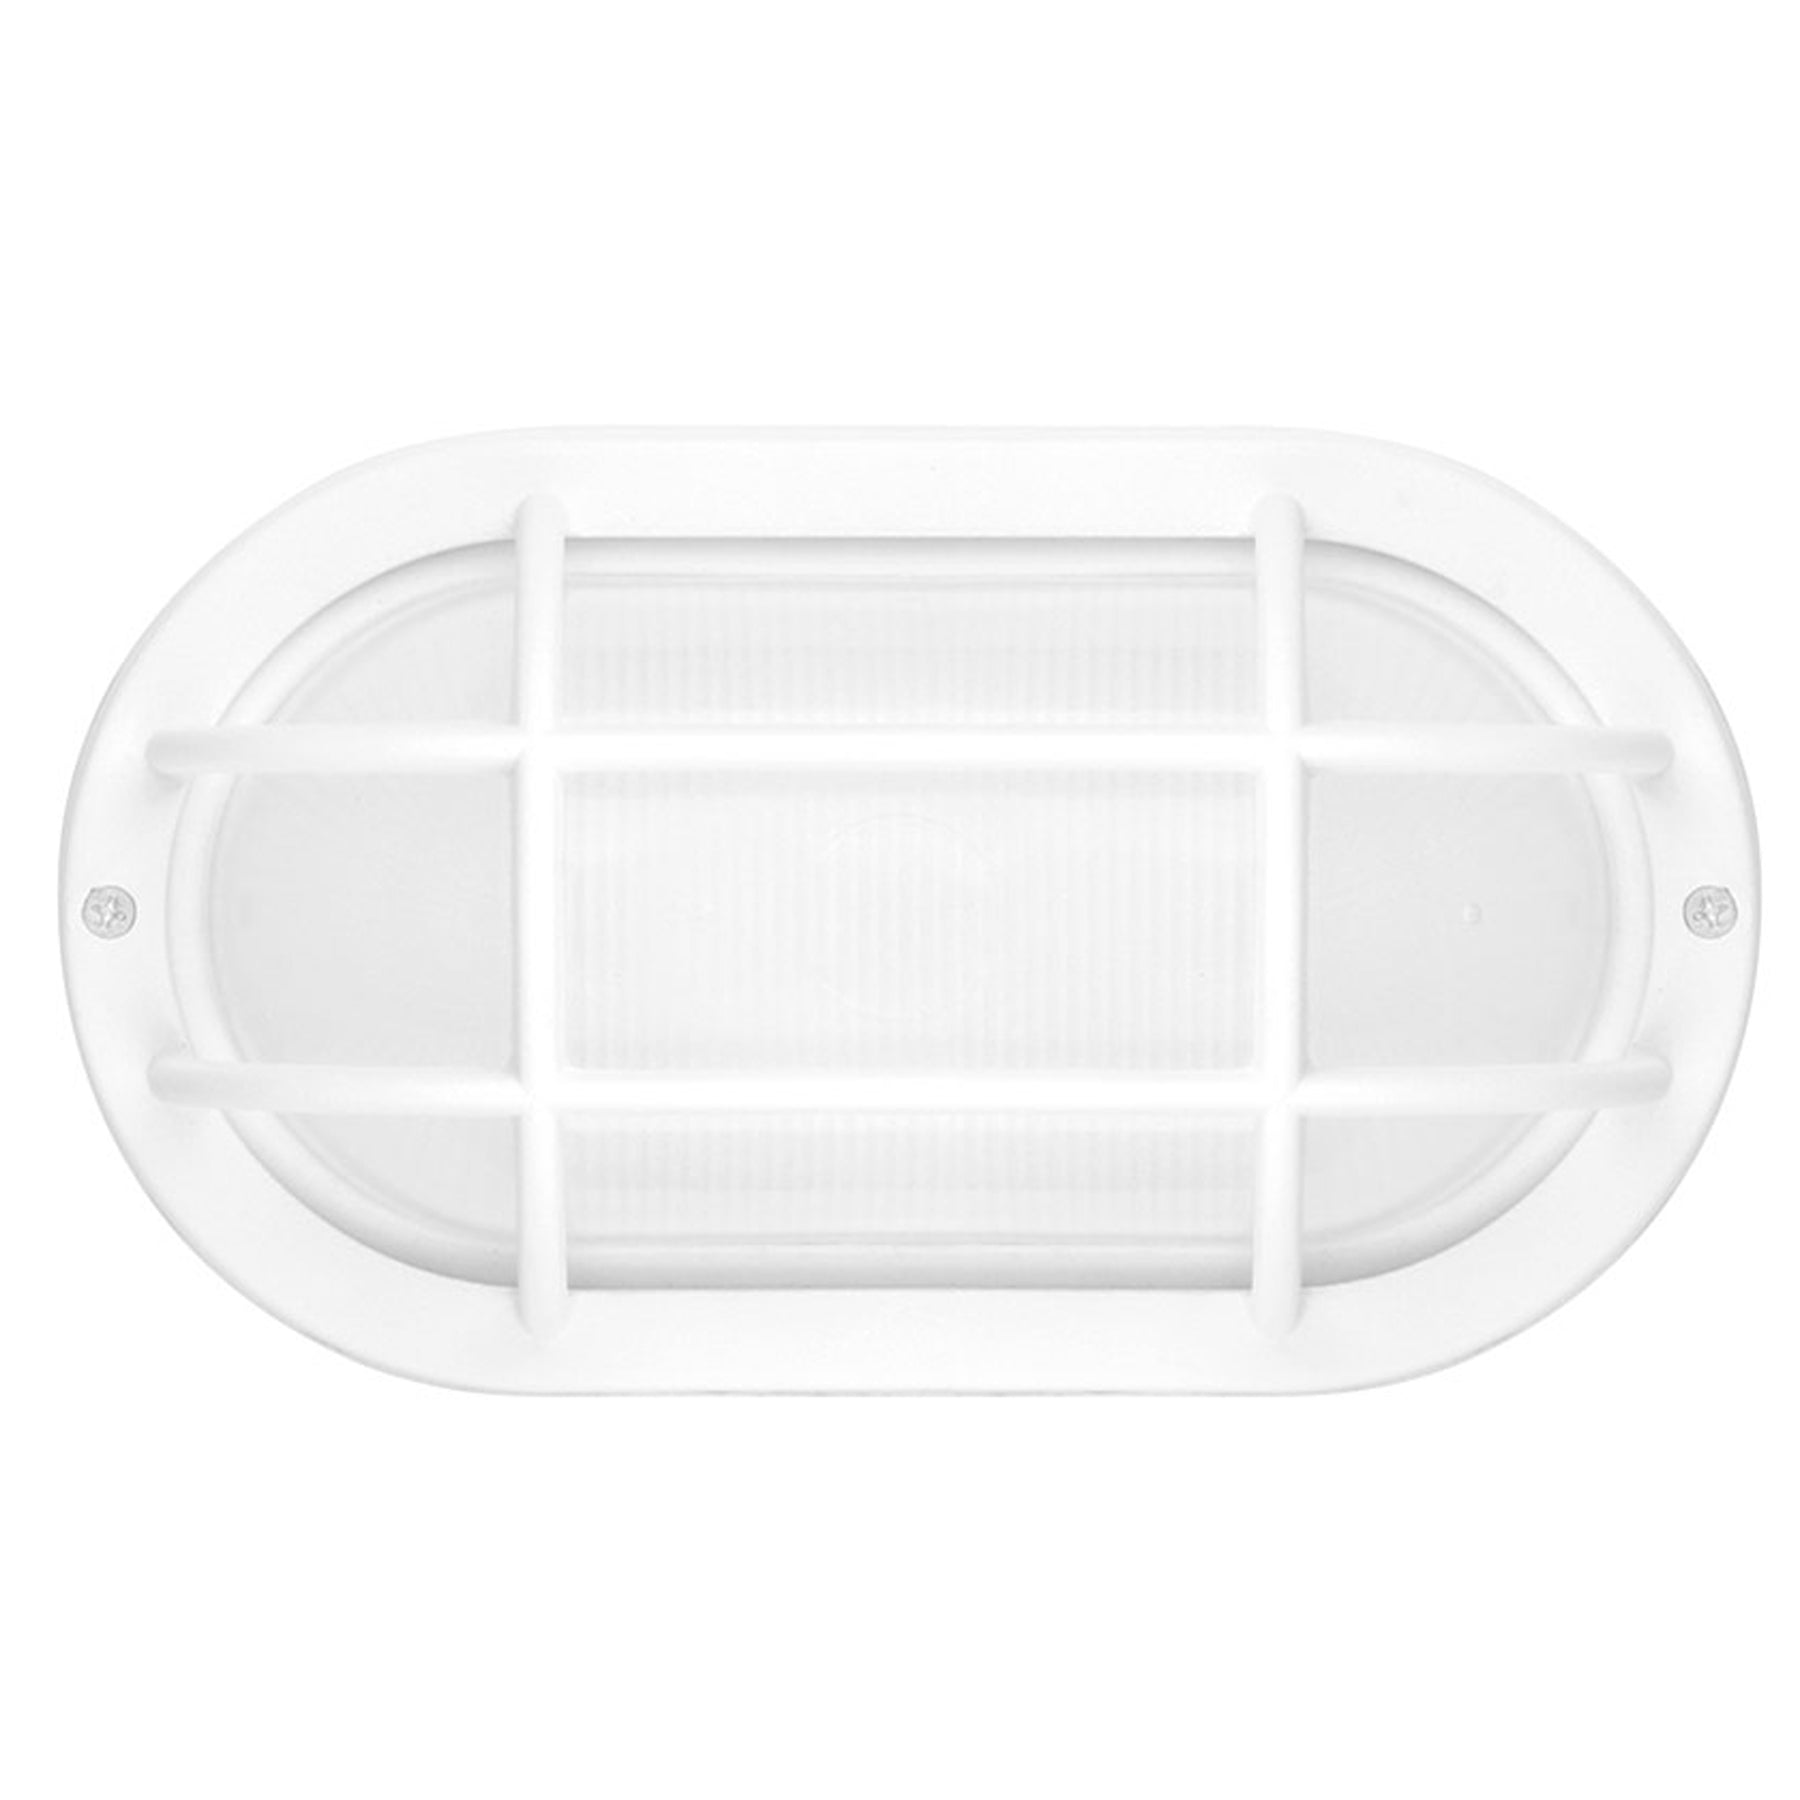 Oval-Shaped White LED Wall Sconce for Versatile Outdoor Illumination